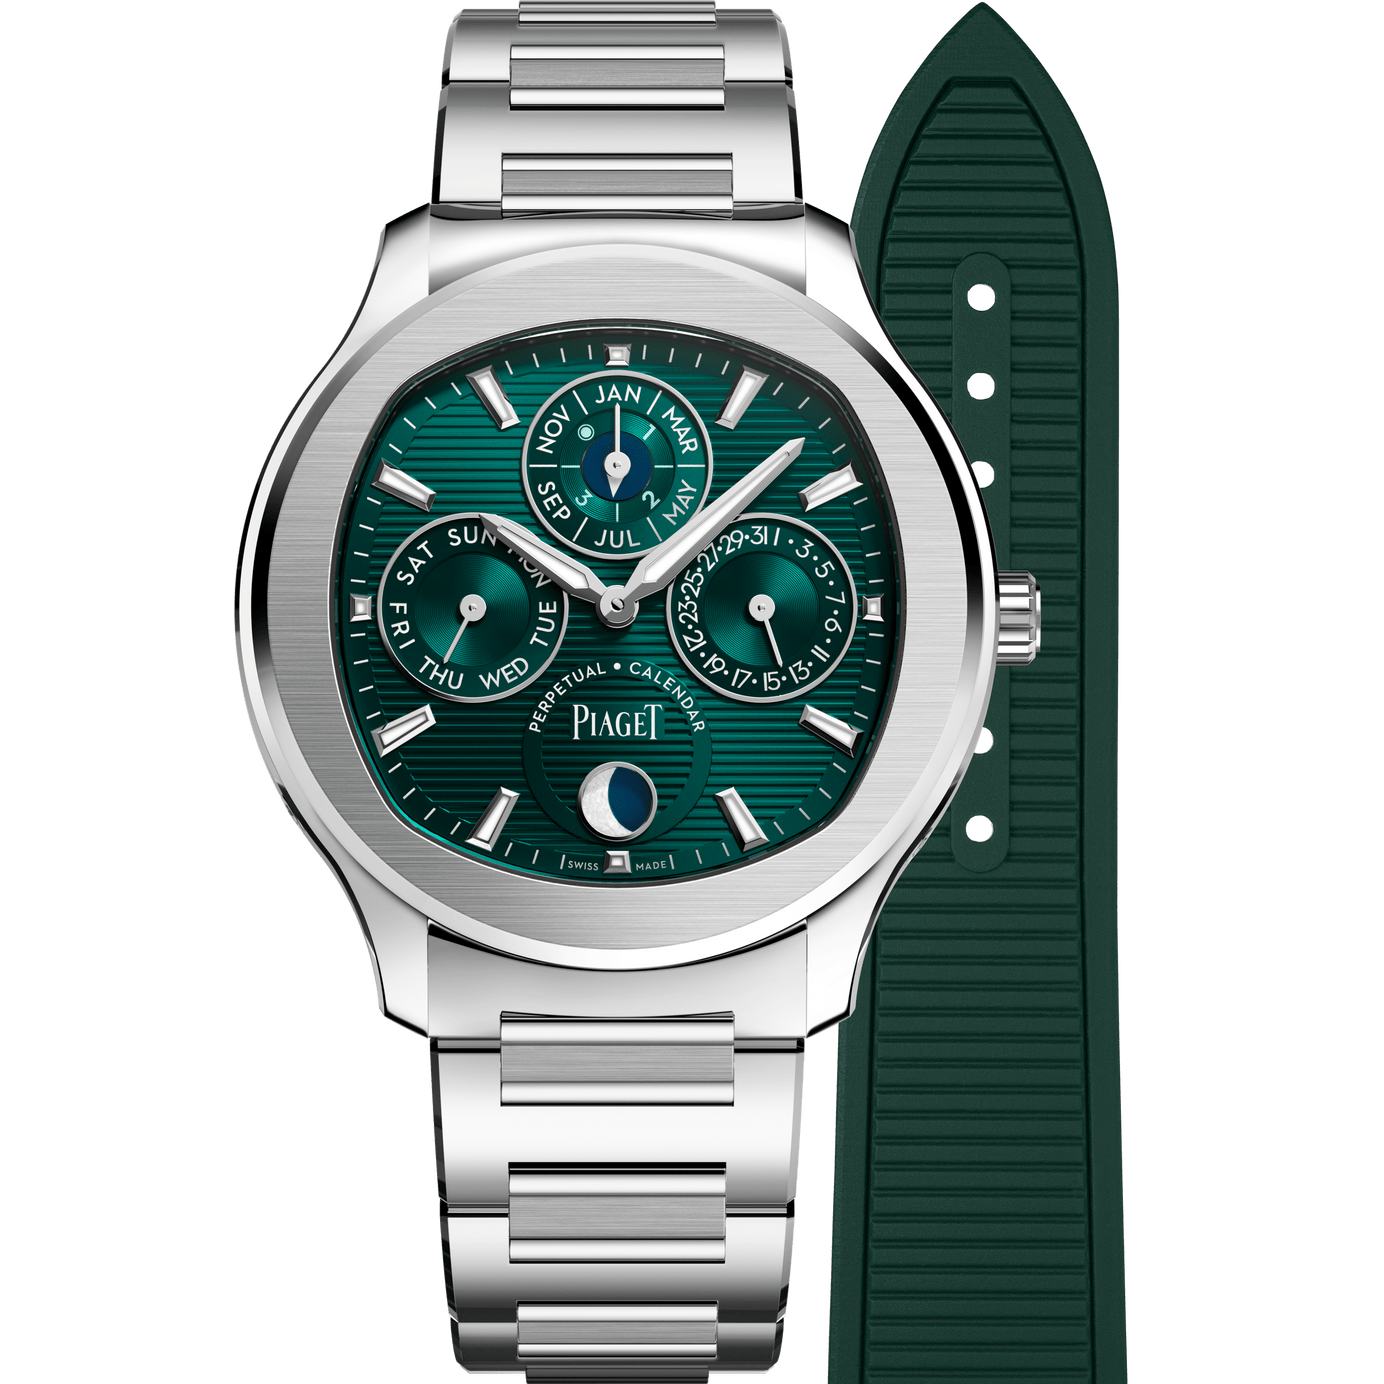 Patek Philippe 3940 Perpetual Calendar Watch | S.Song Timepieces – S.Song  Watches